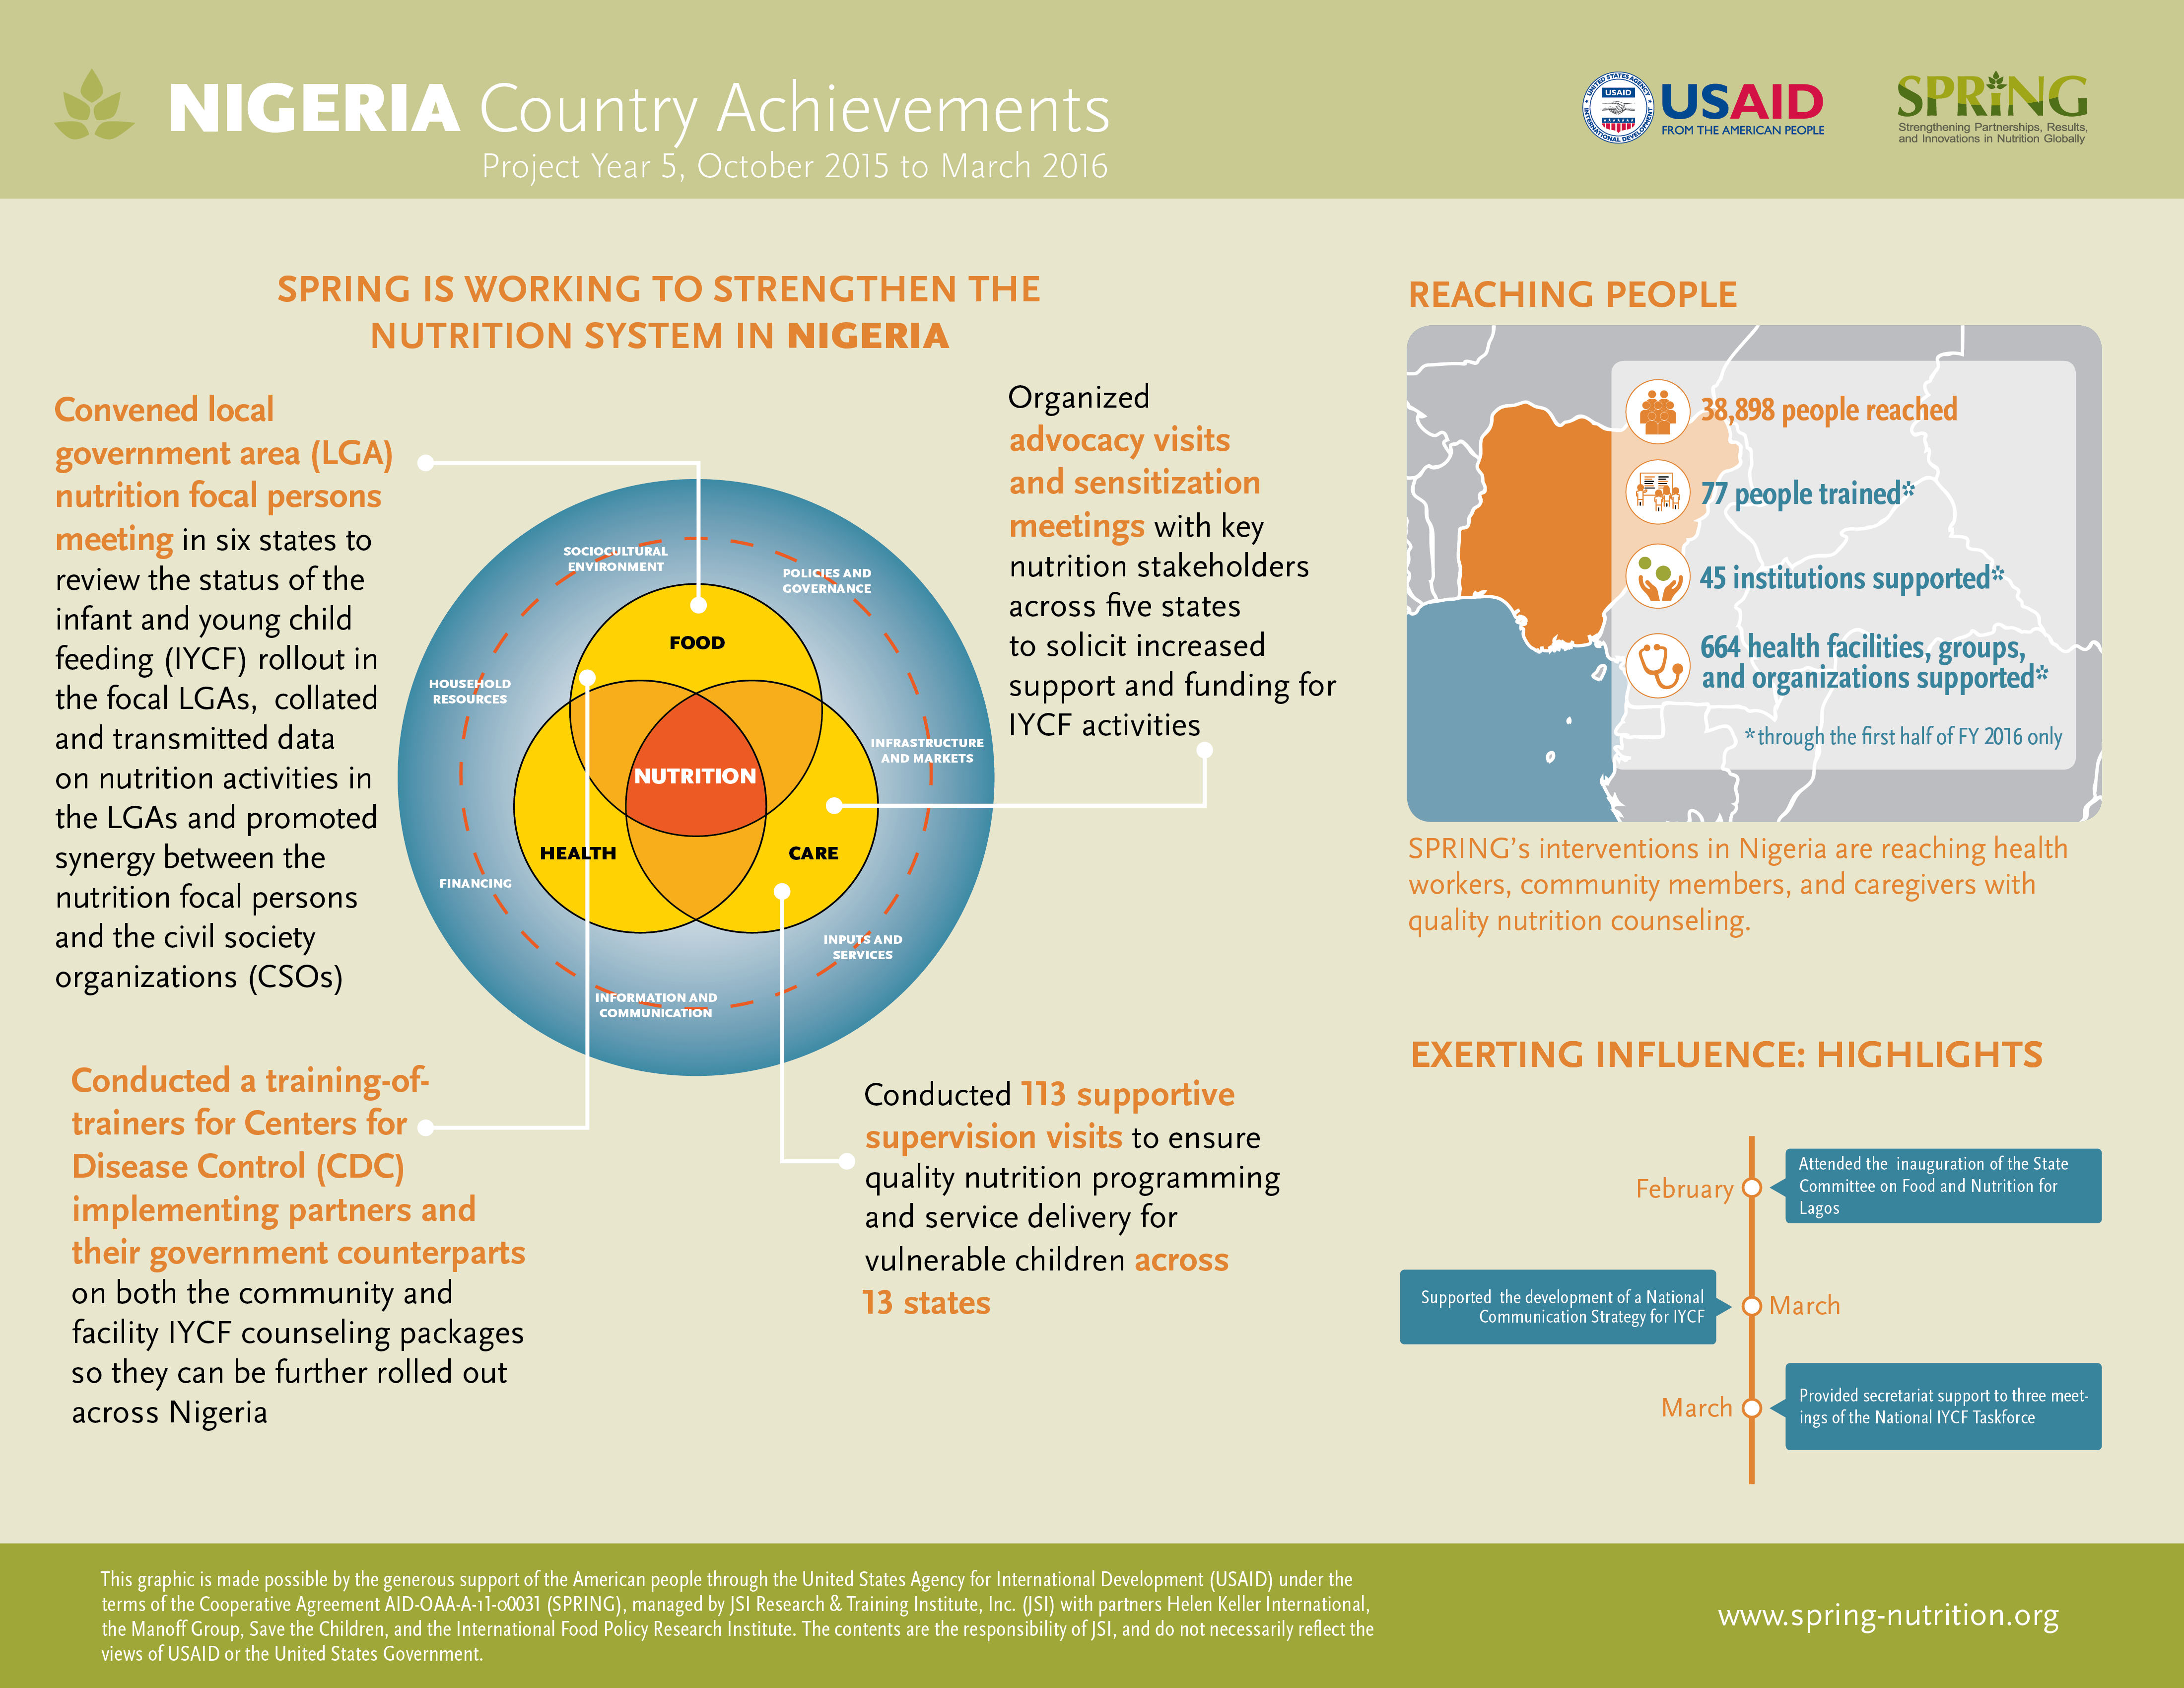 Nigeria Country Achievements, Project Year 5, October 2015 to March 2016